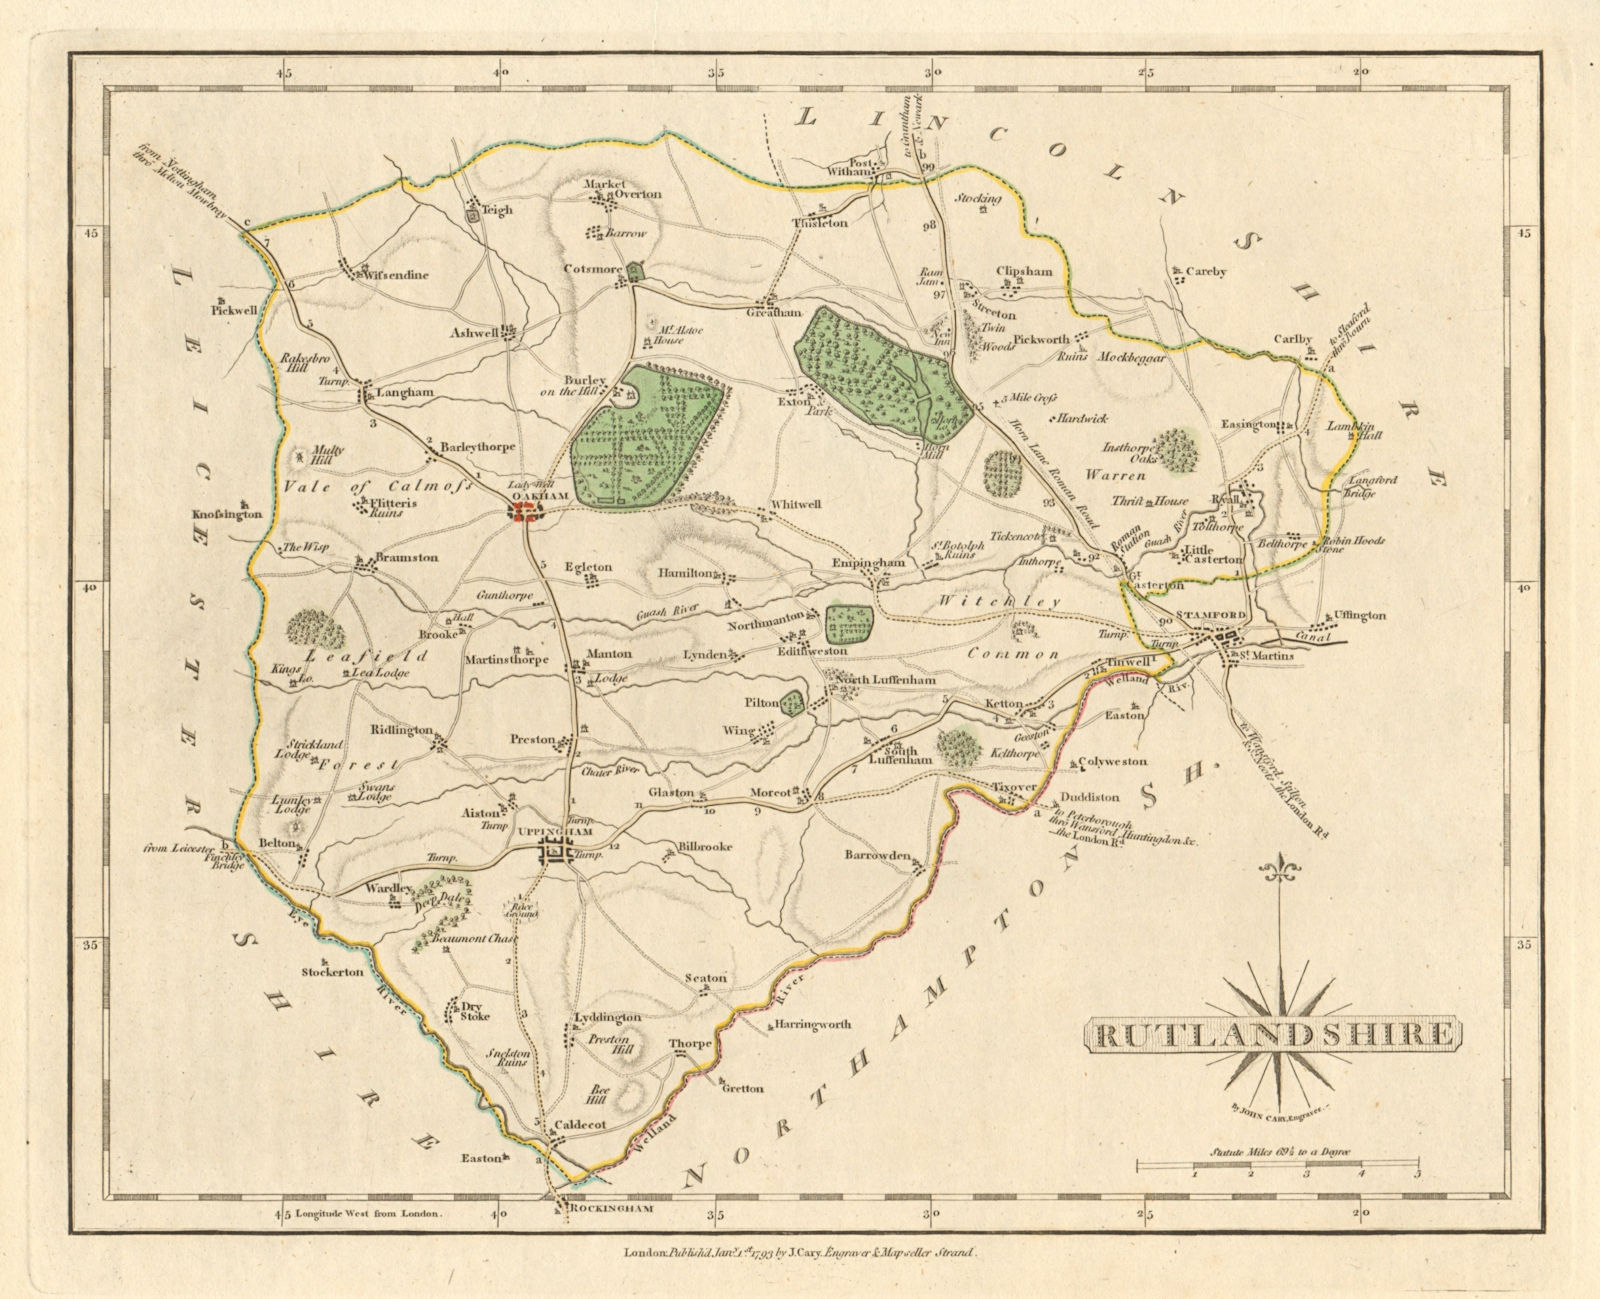 Associate Product Antique county map of RUTLANDSHIRE by JOHN CARY. Original outline colour 1793